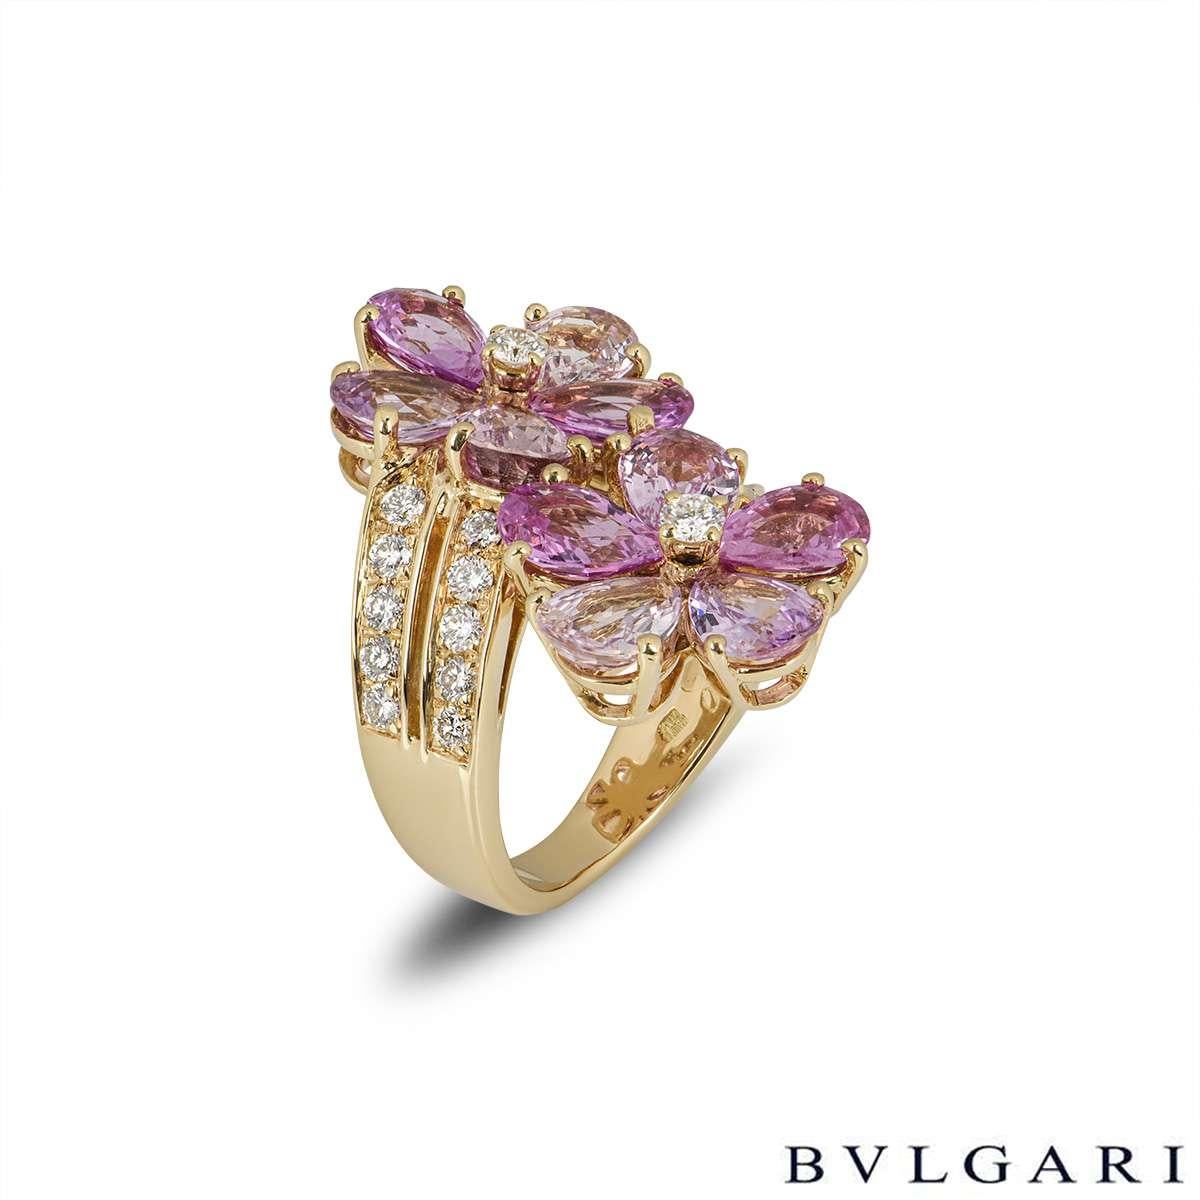 A beautiful 18k yellow gold, diamond and sapphire ring by Bvlgari from the Sapphire Flower collection. The ring comprises of 2 flower motifs composed of 10 fancy coloured pear cut sapphires as petals with 20 round brilliant cut diamonds in a pave